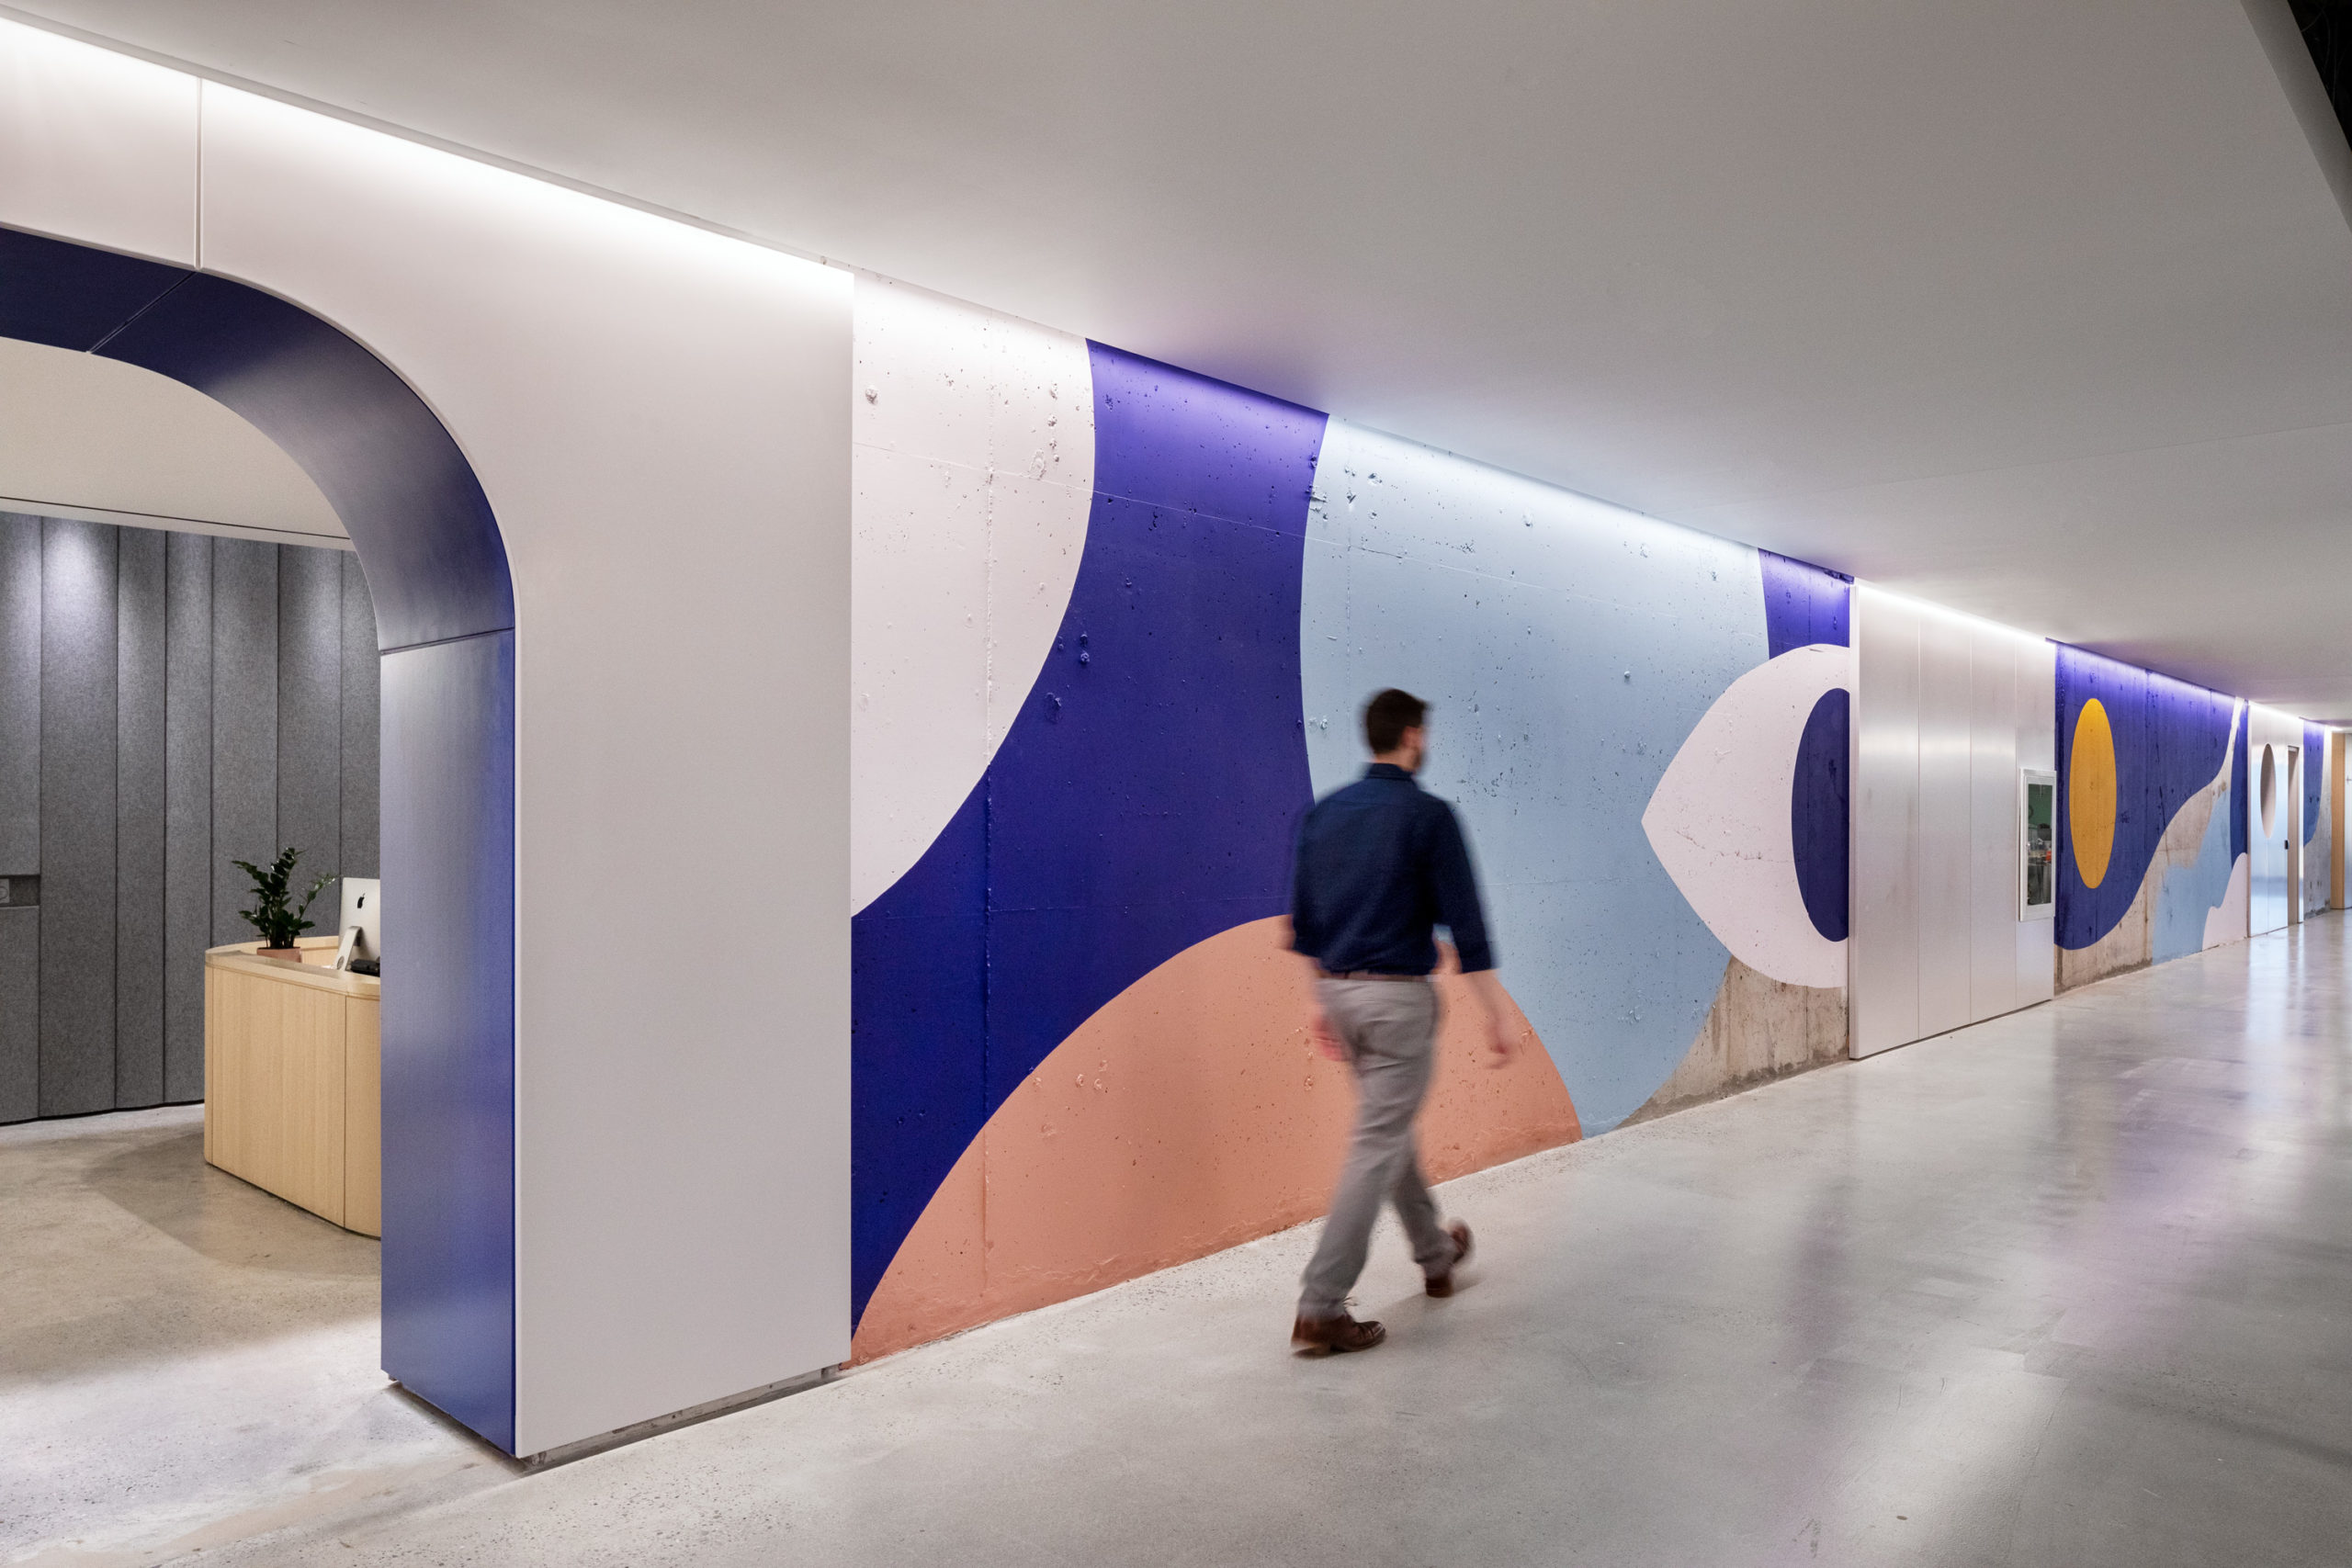 Interiors Citation Award: Casper New York Headquarters by Architecture Research Office, in New York, NY. Photo: James Ewing.